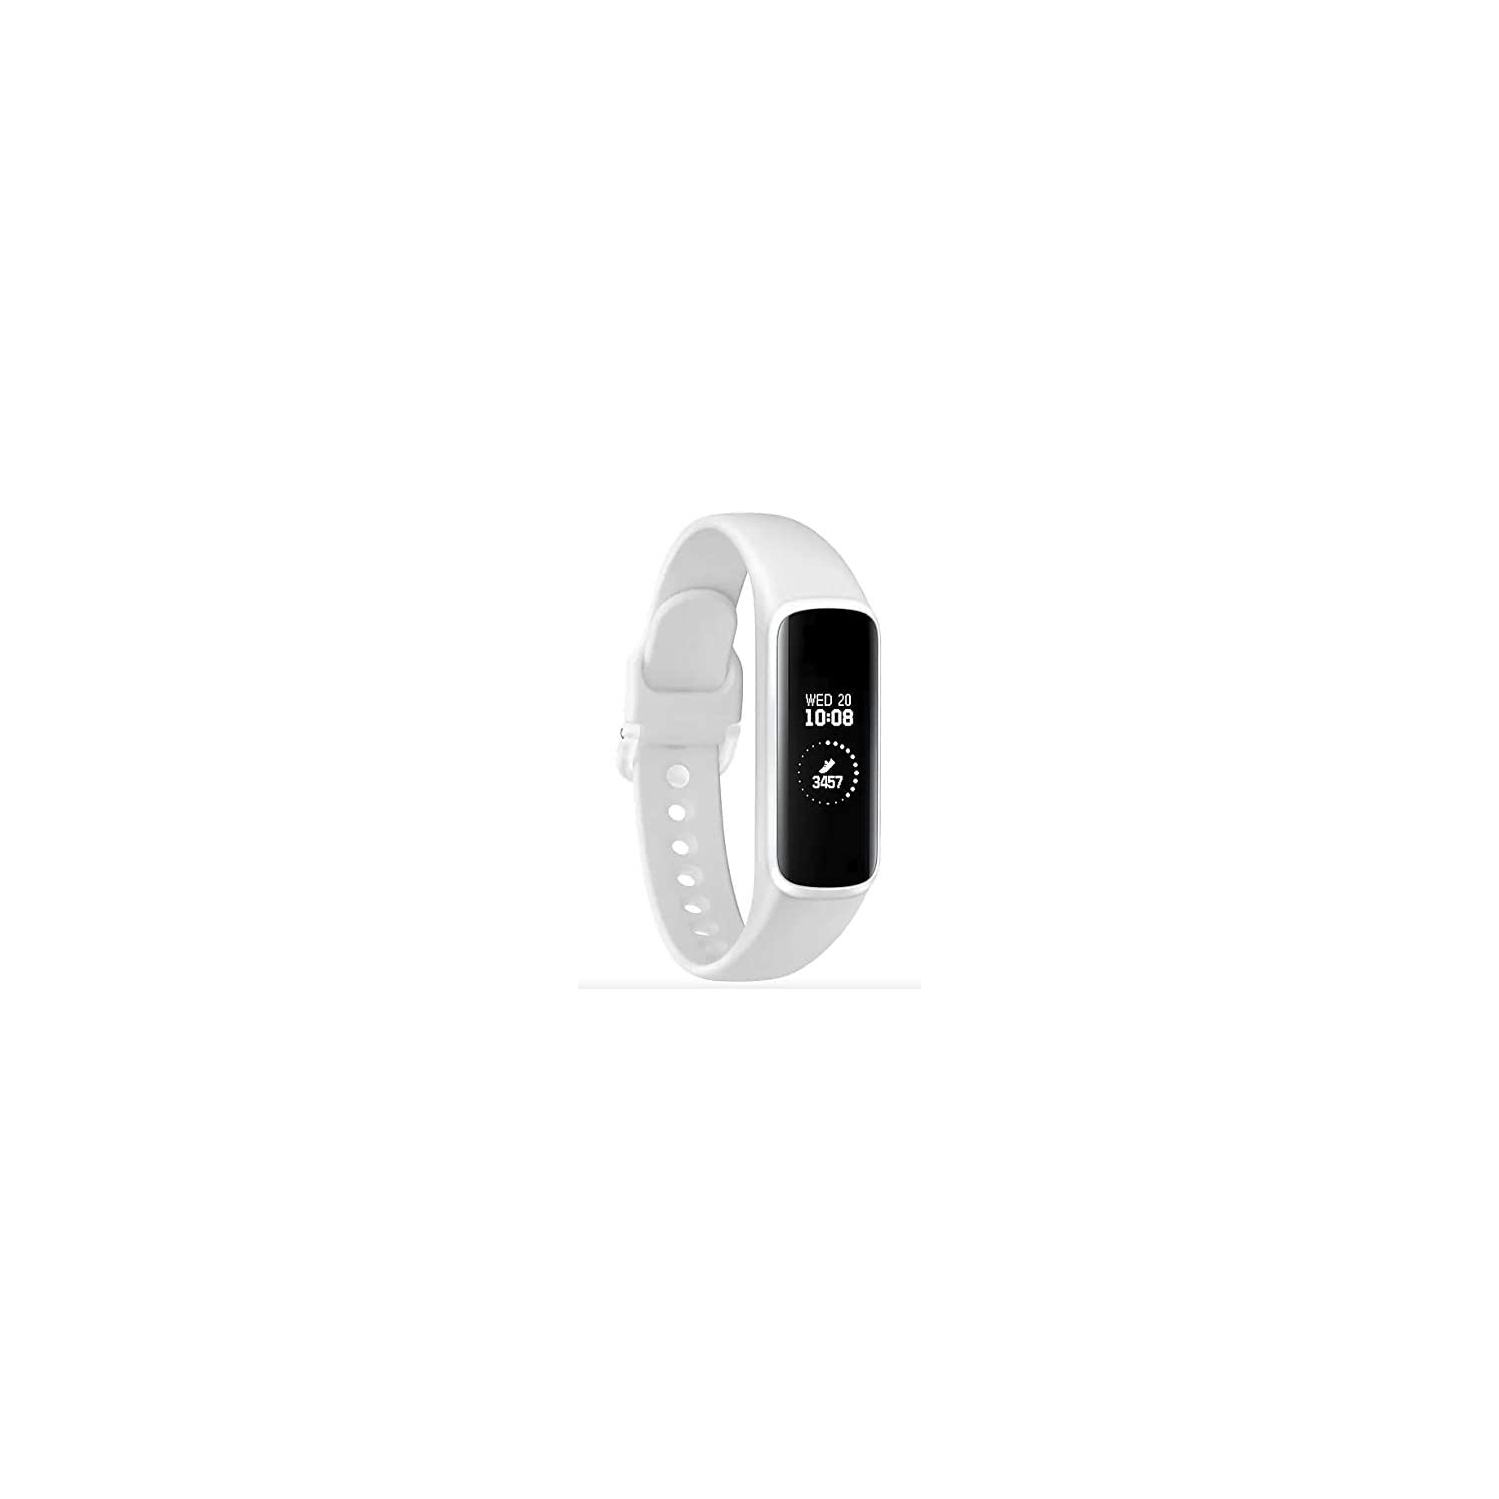 Samsung Galaxy Fit E 2019, Fitness Band, Pedometer, Heart Rate & Sleep Tracker, PMOLED Display, 5ATM Water Resistance - White - Open Box